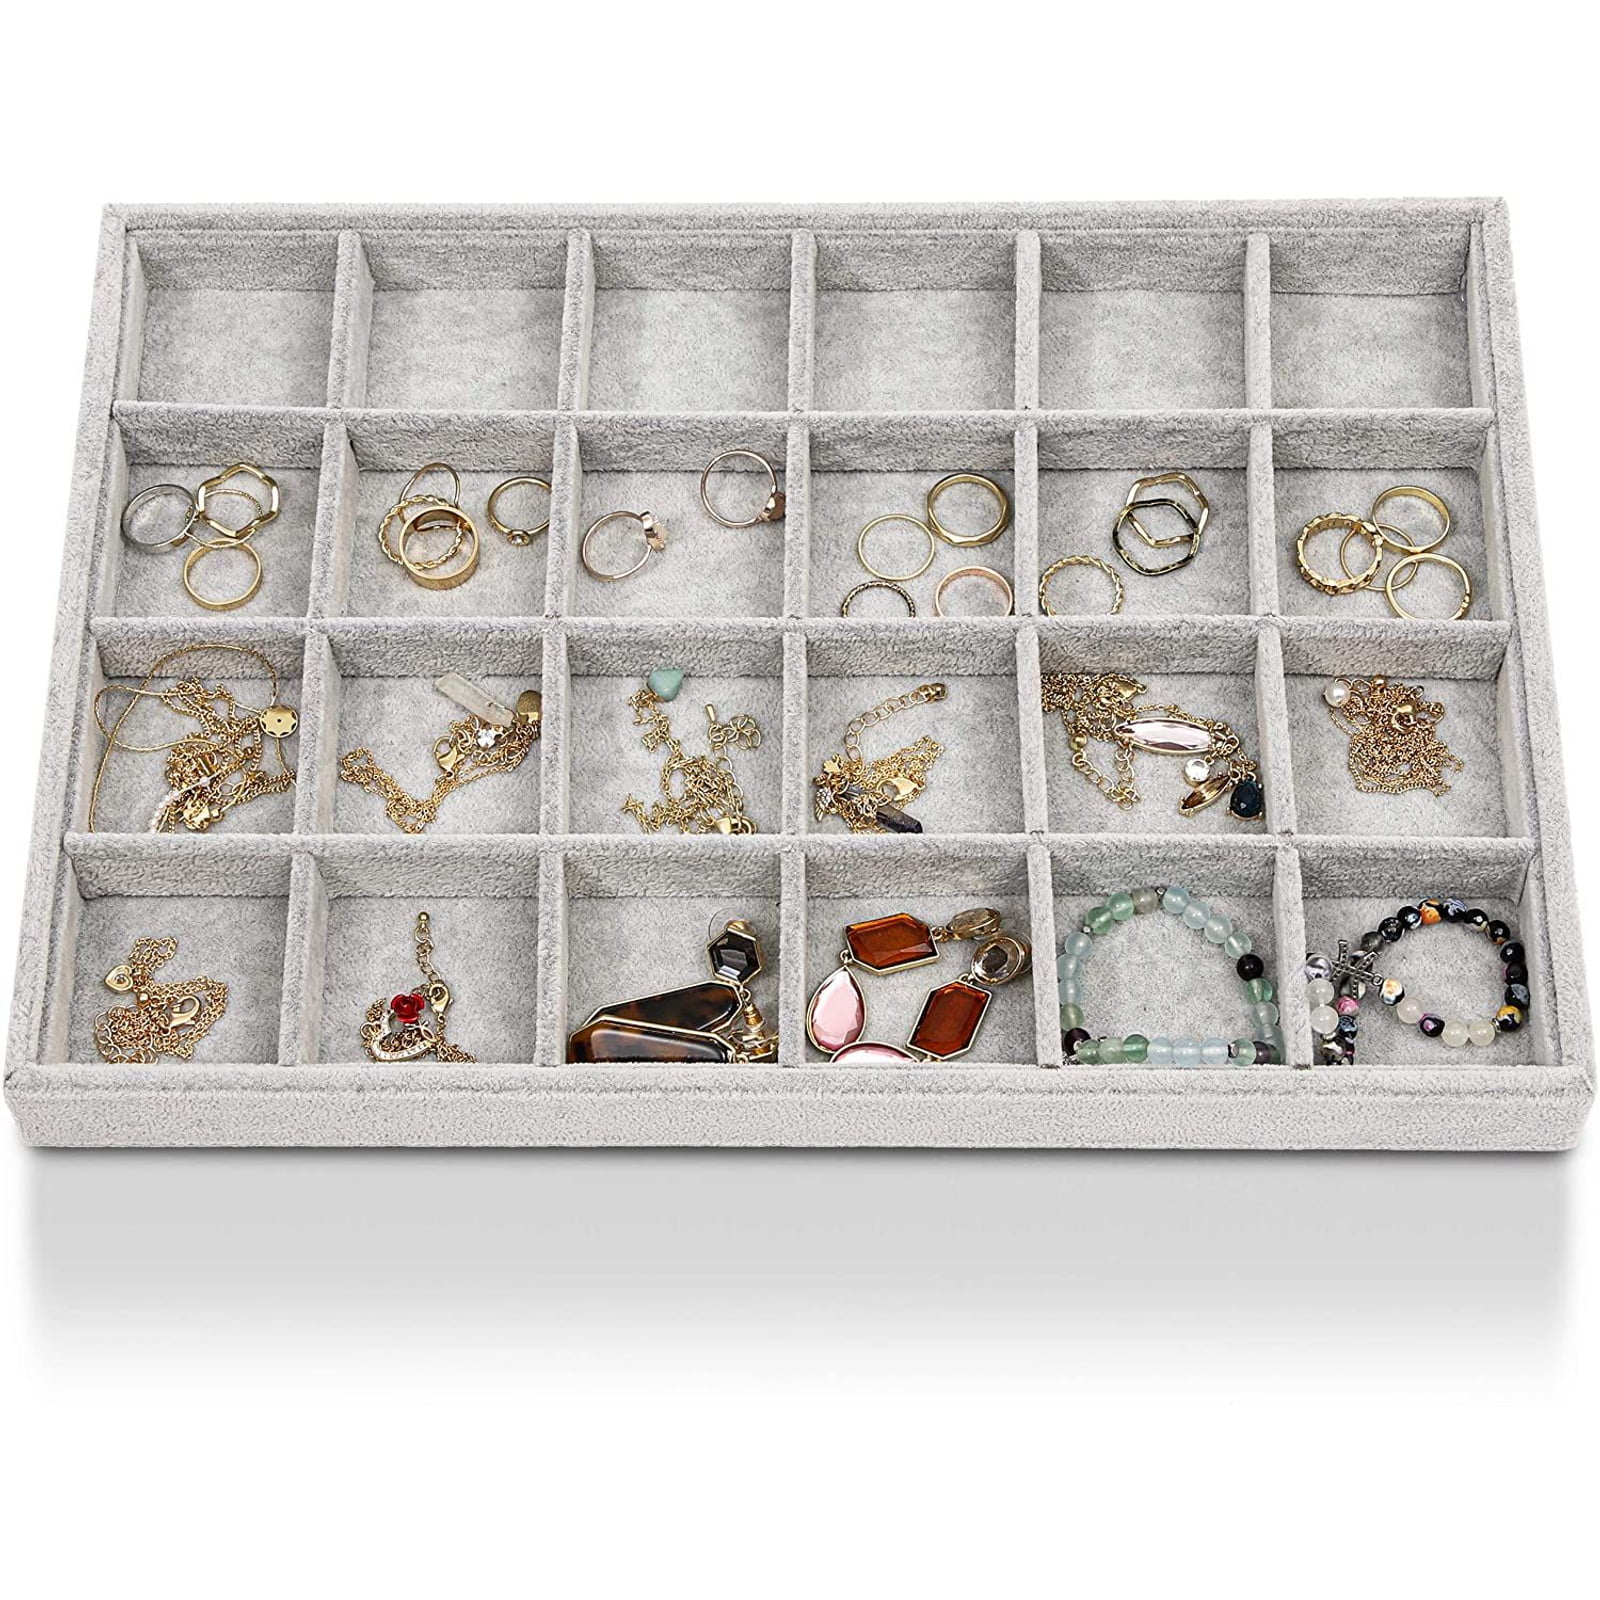 Velvet Compartment Jewelry Display Organizer Case for Necklace Ring Earrings 